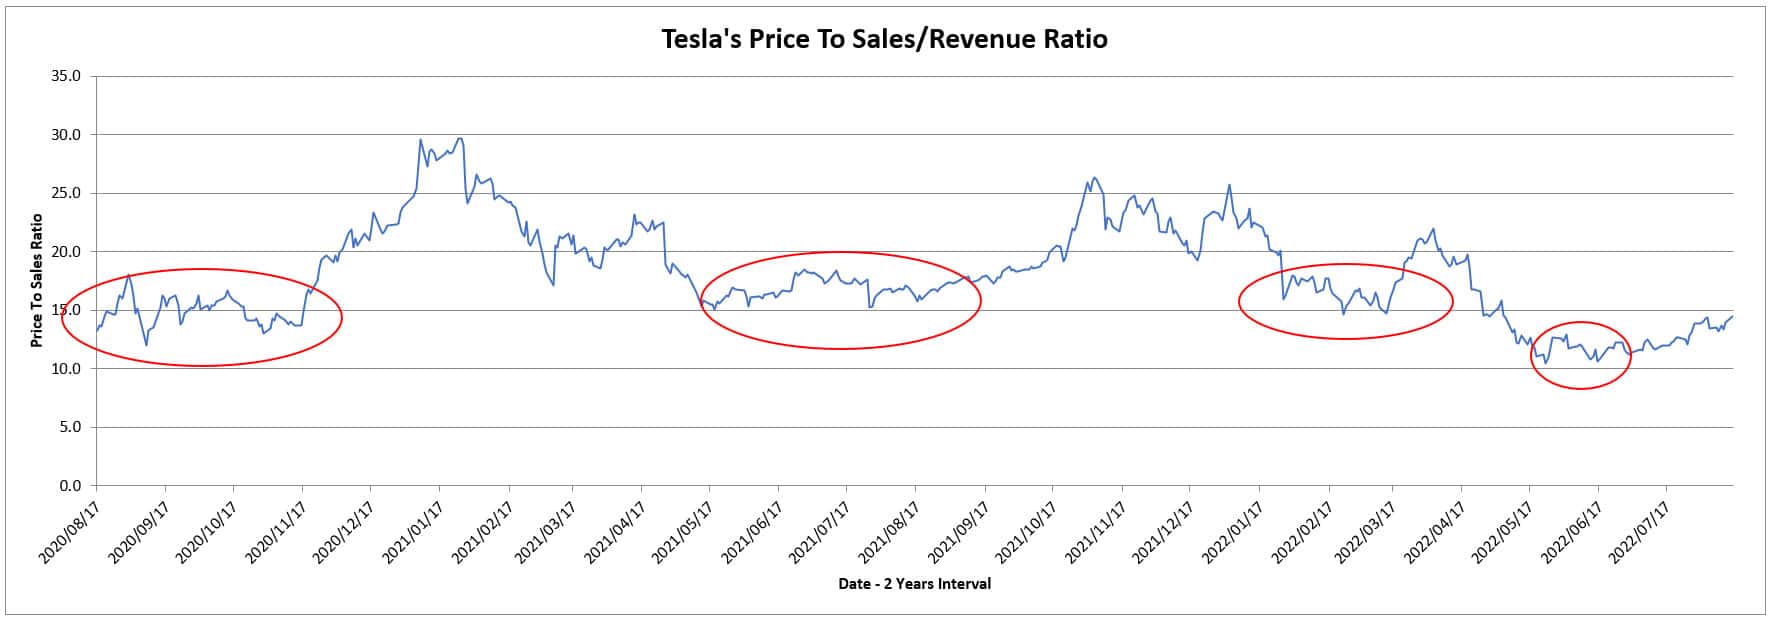 Tesla's highlighted buy points